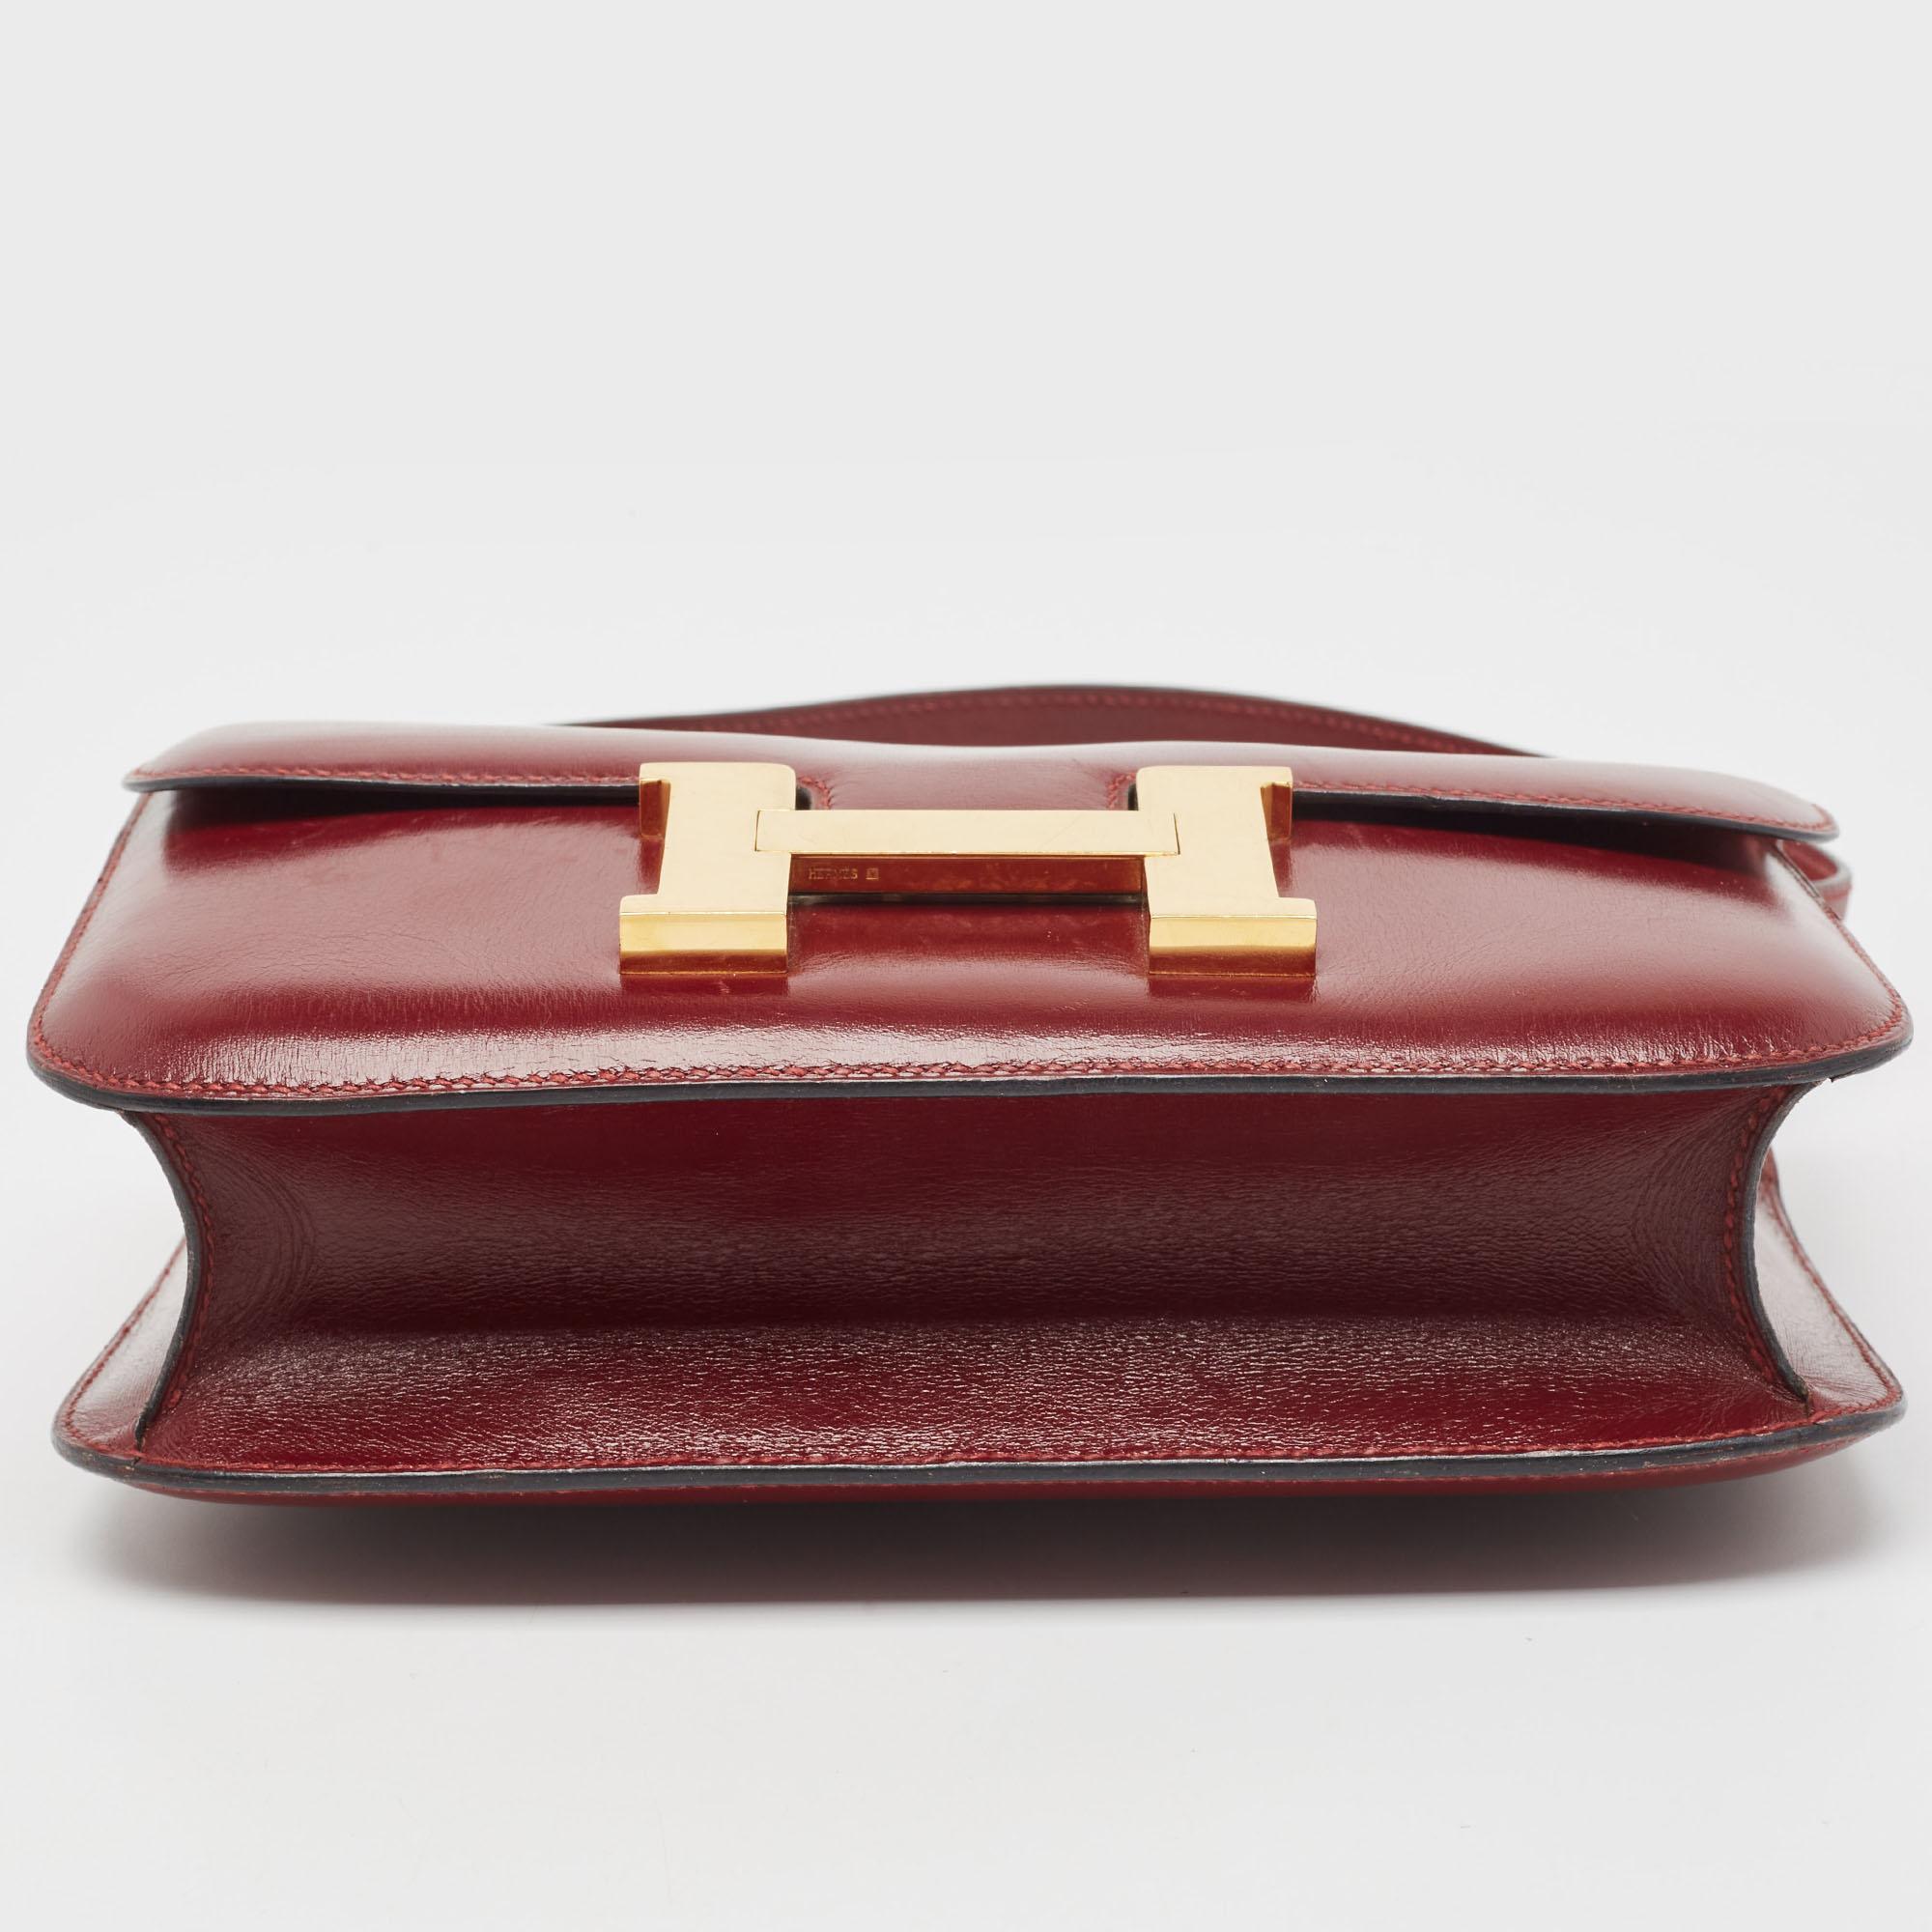 This Hermes Constance 24 is crafted using Box Calf leather and features the iconic H clasp on the front flap. The shoulder strap lets you carry it gracefully, and the fine finish of the sturdy silhouette projects a luxe look. Get this covetable